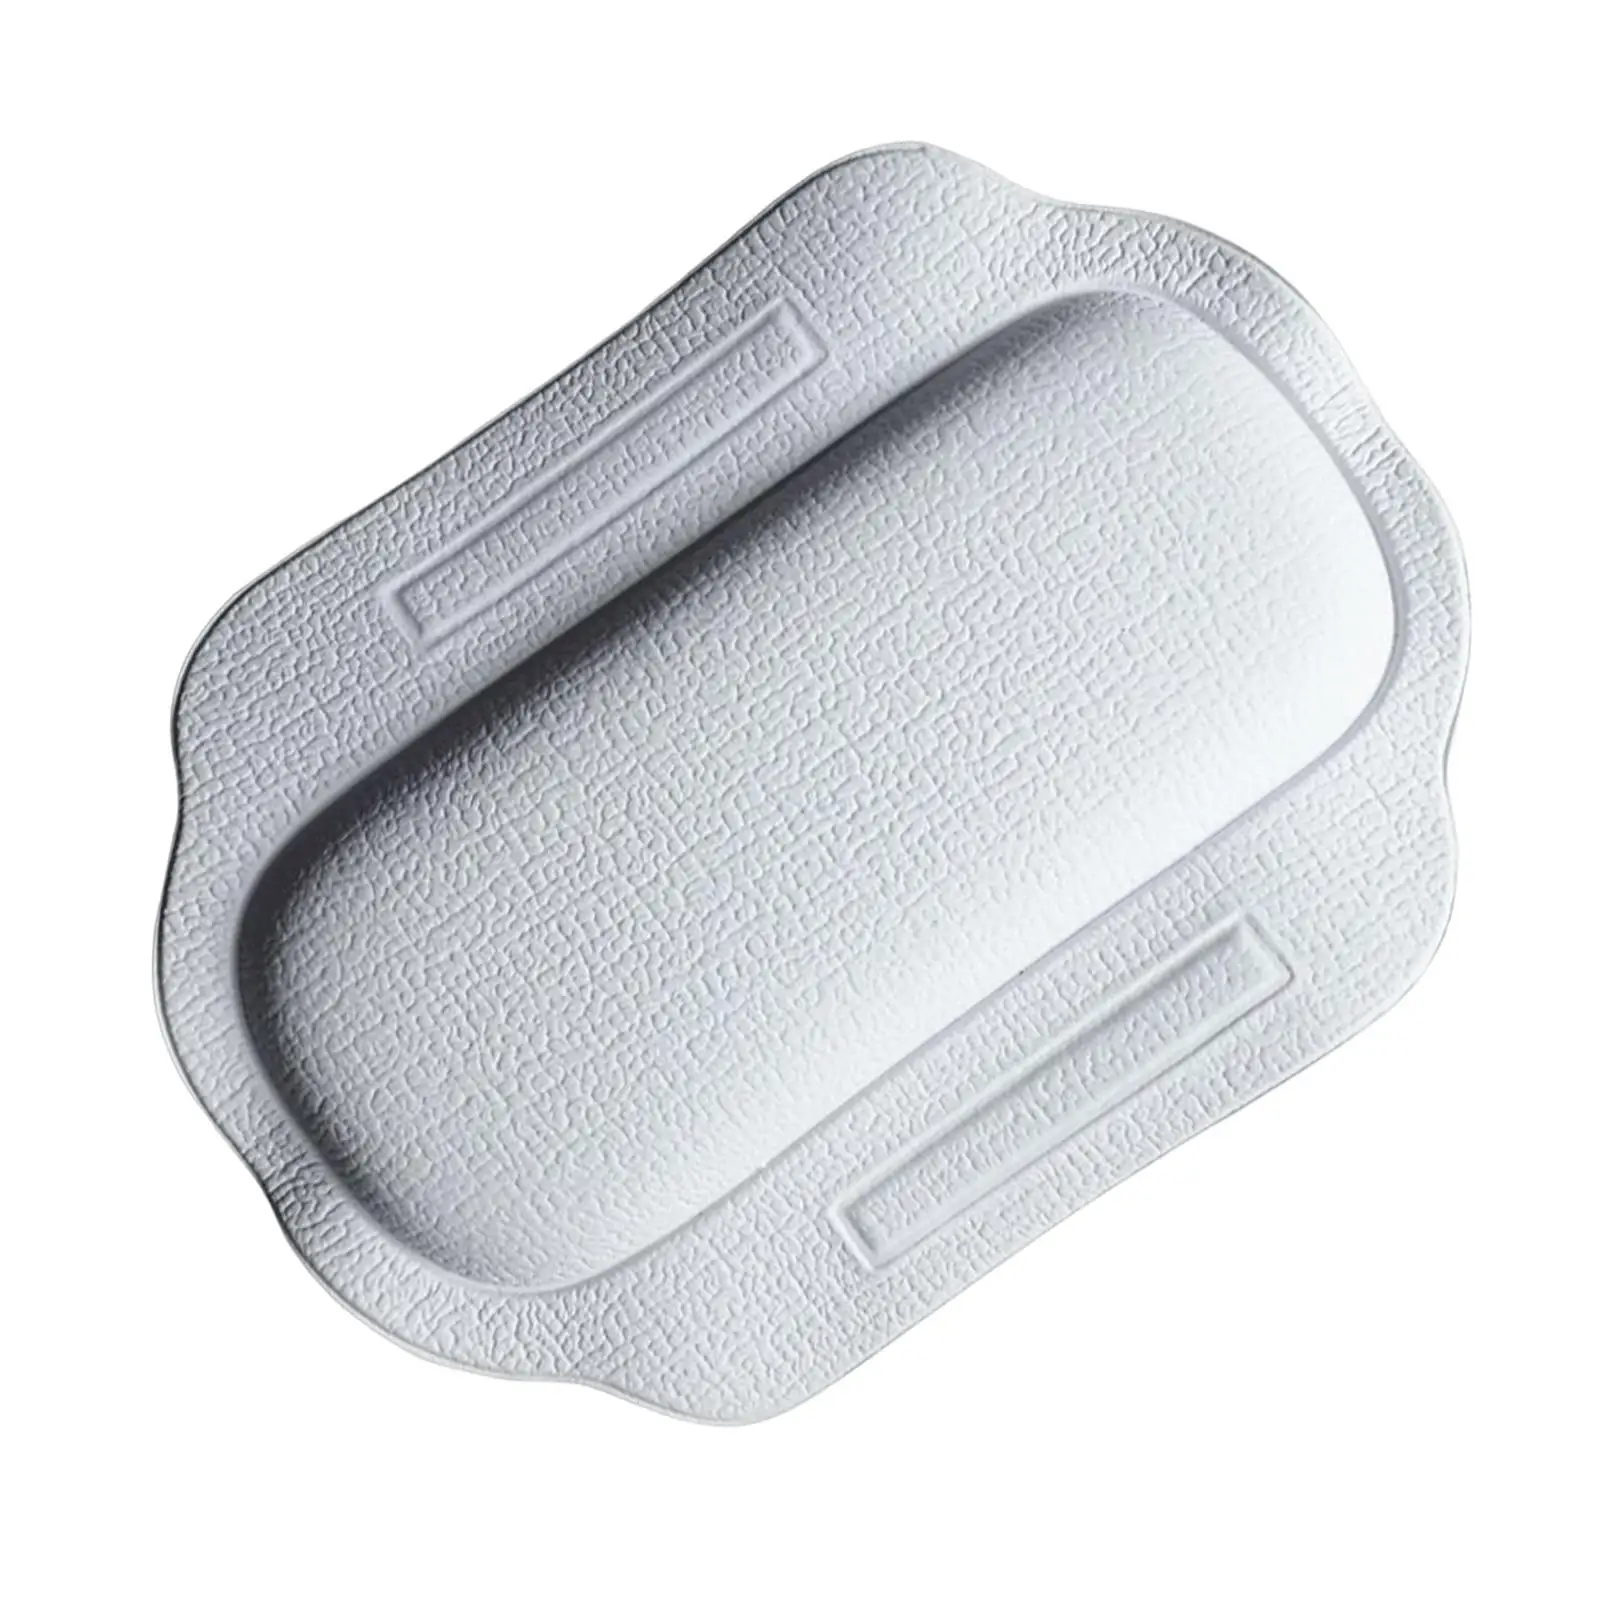 Bath Pillow Relax Comfy with Suction Cups Accessories Quick Drying Home Cushion Tub Pillow Support SPA Bathtub Head Rest